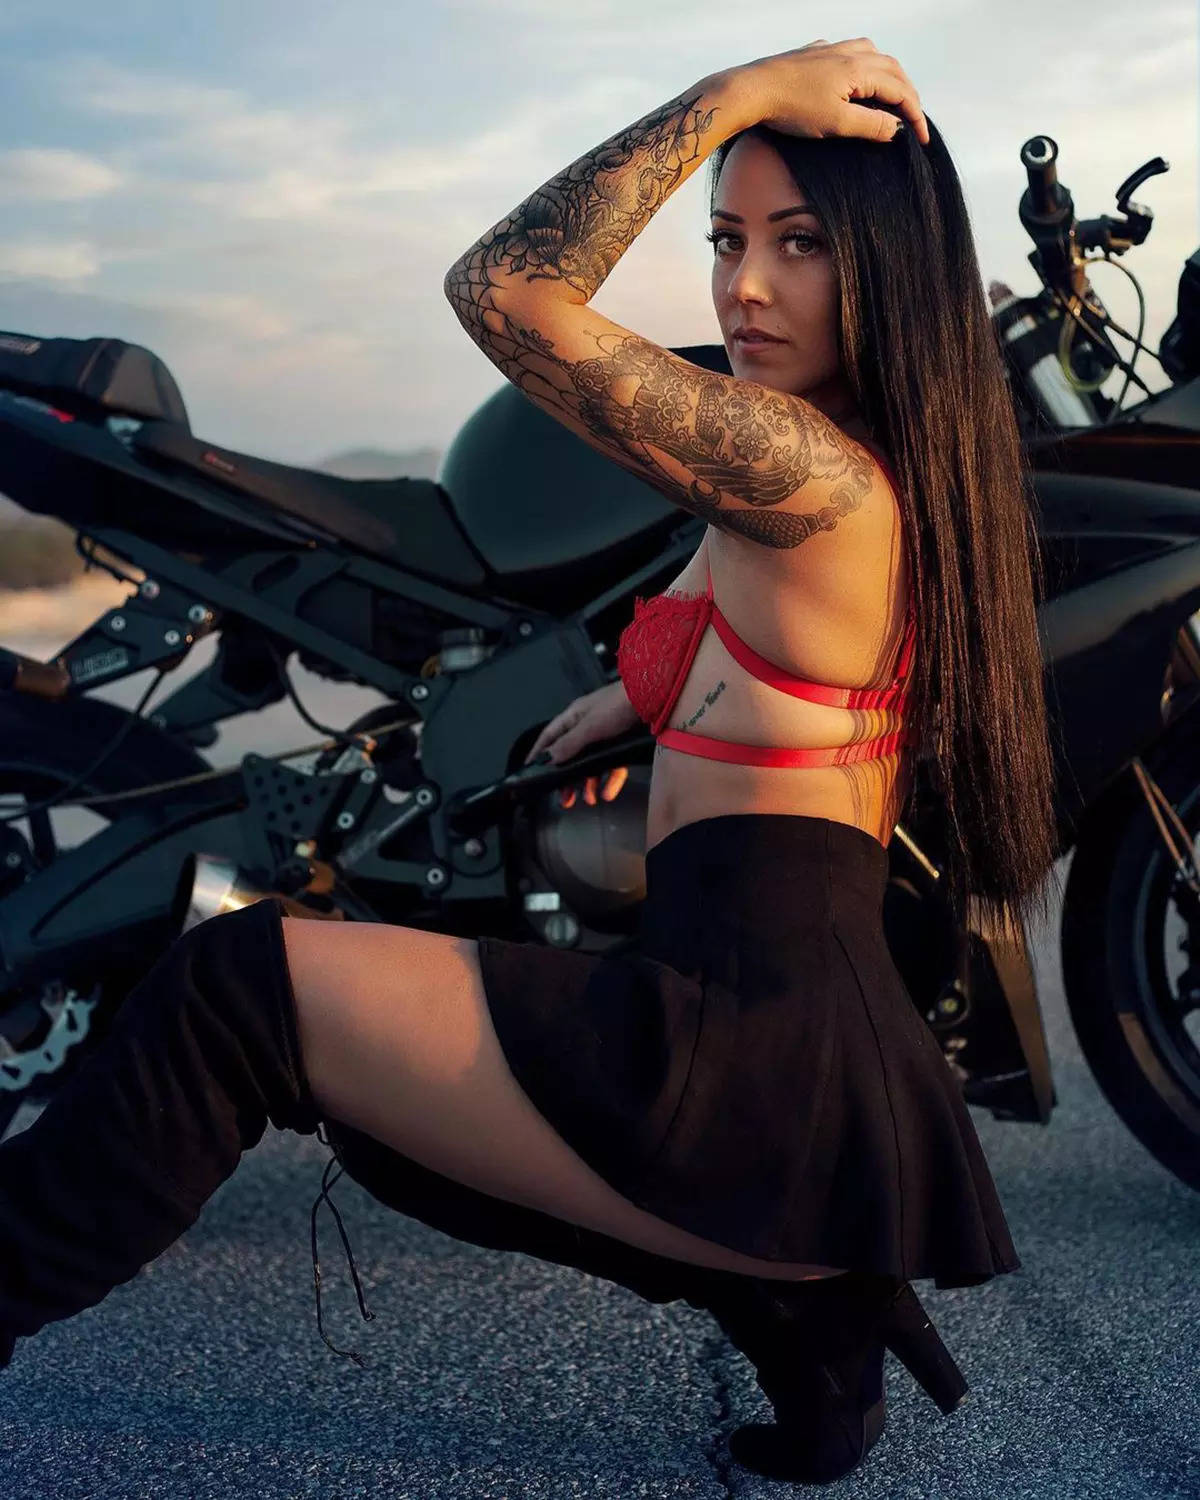 Female bikers who are no less than their male contenders